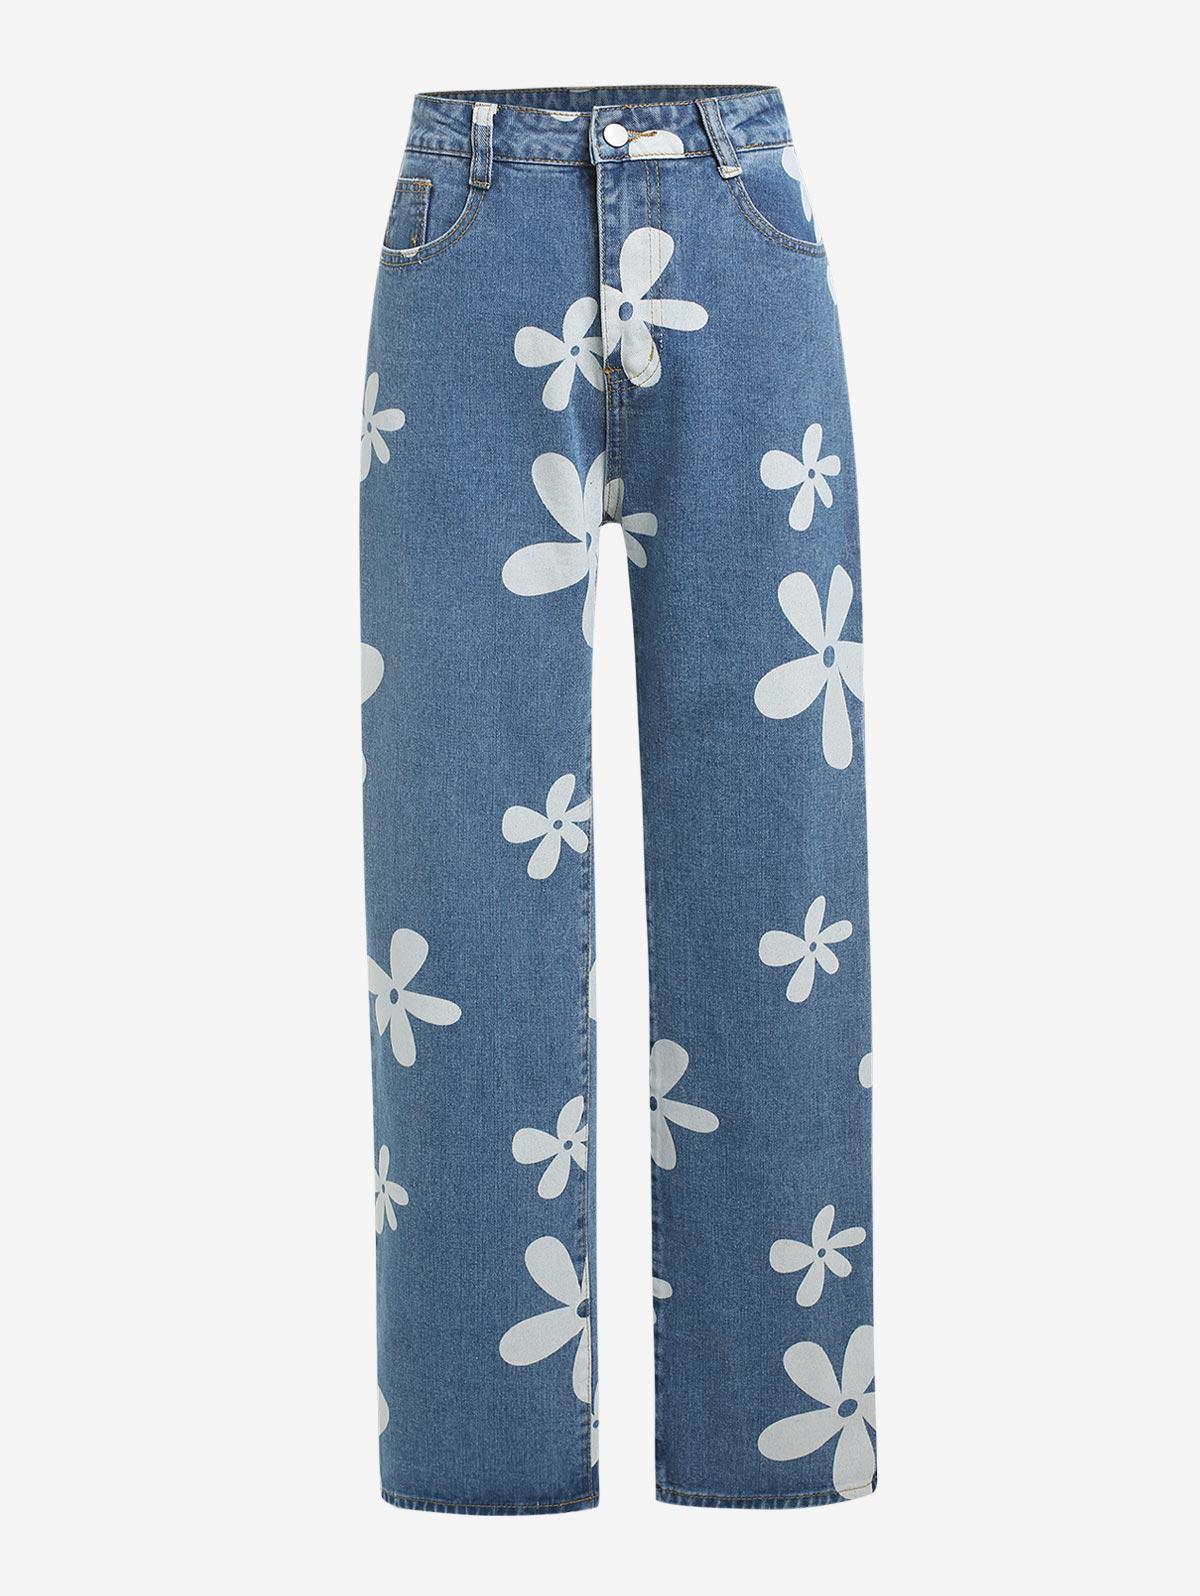 Zaful Flower Print High Waisted baggy Jeans in Blue | Lyst